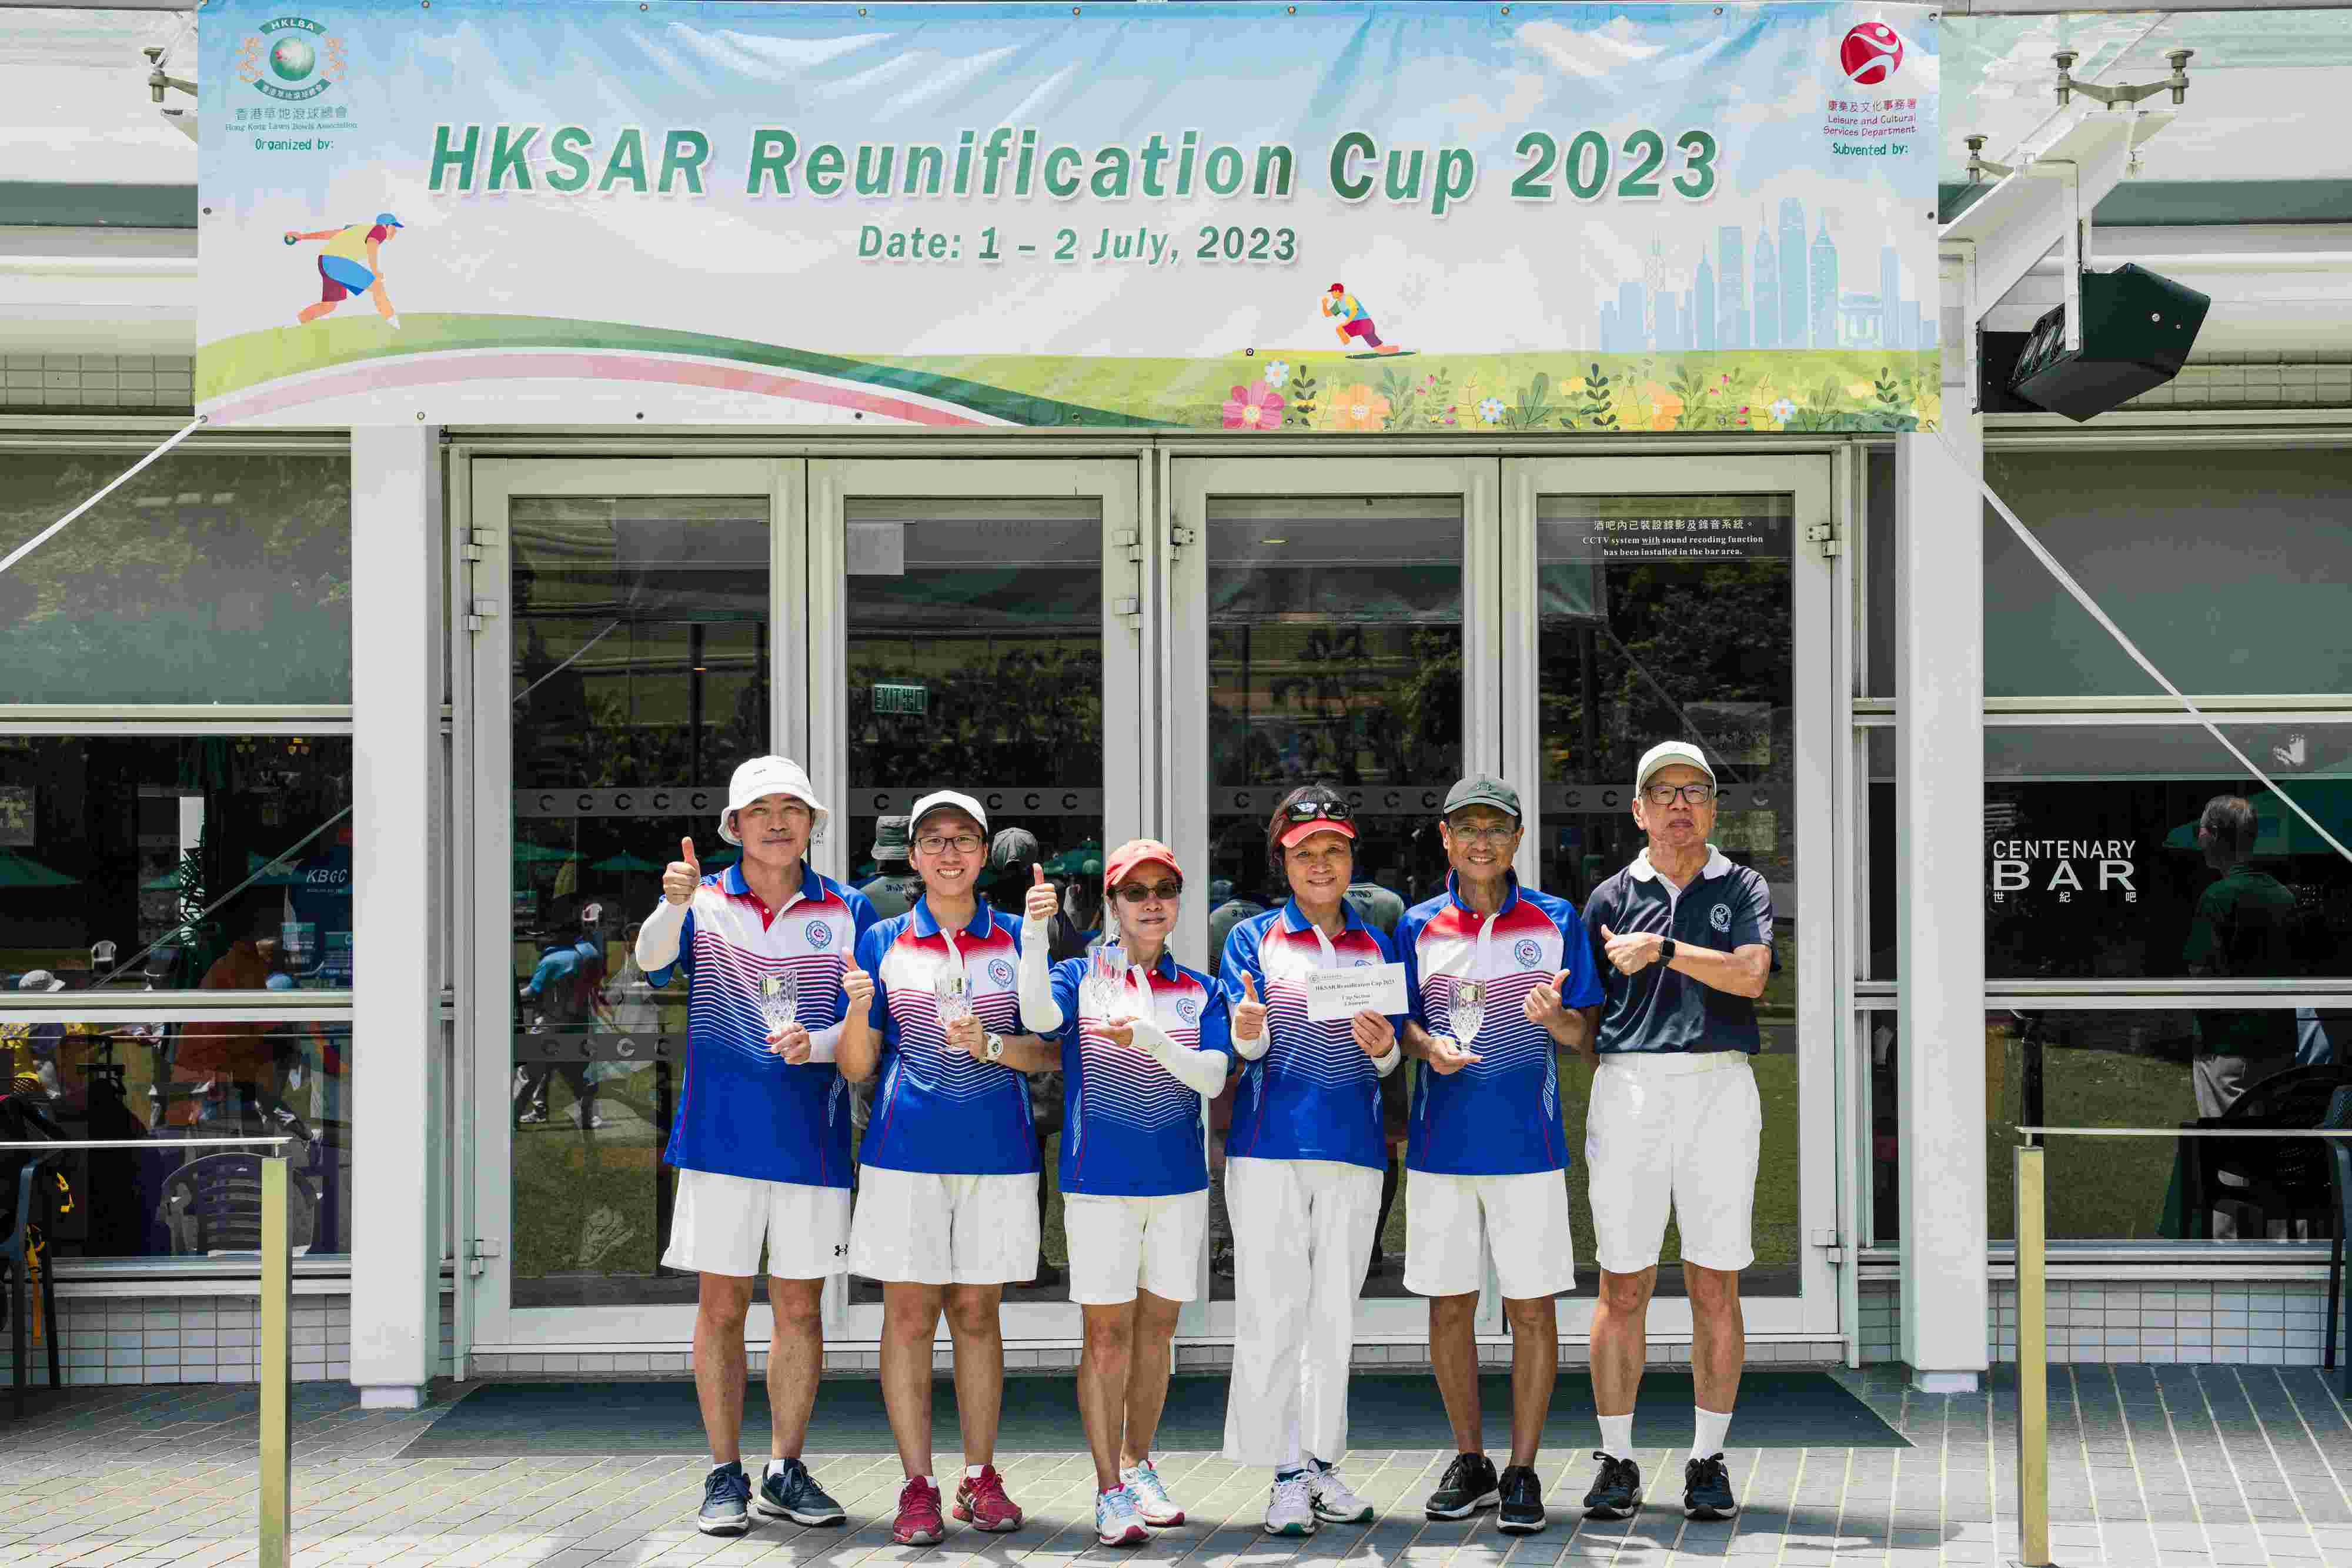 Photo link – HKSAR Reunification Cup 2023 (9 July, 2023) (Issued on 10/7/23)